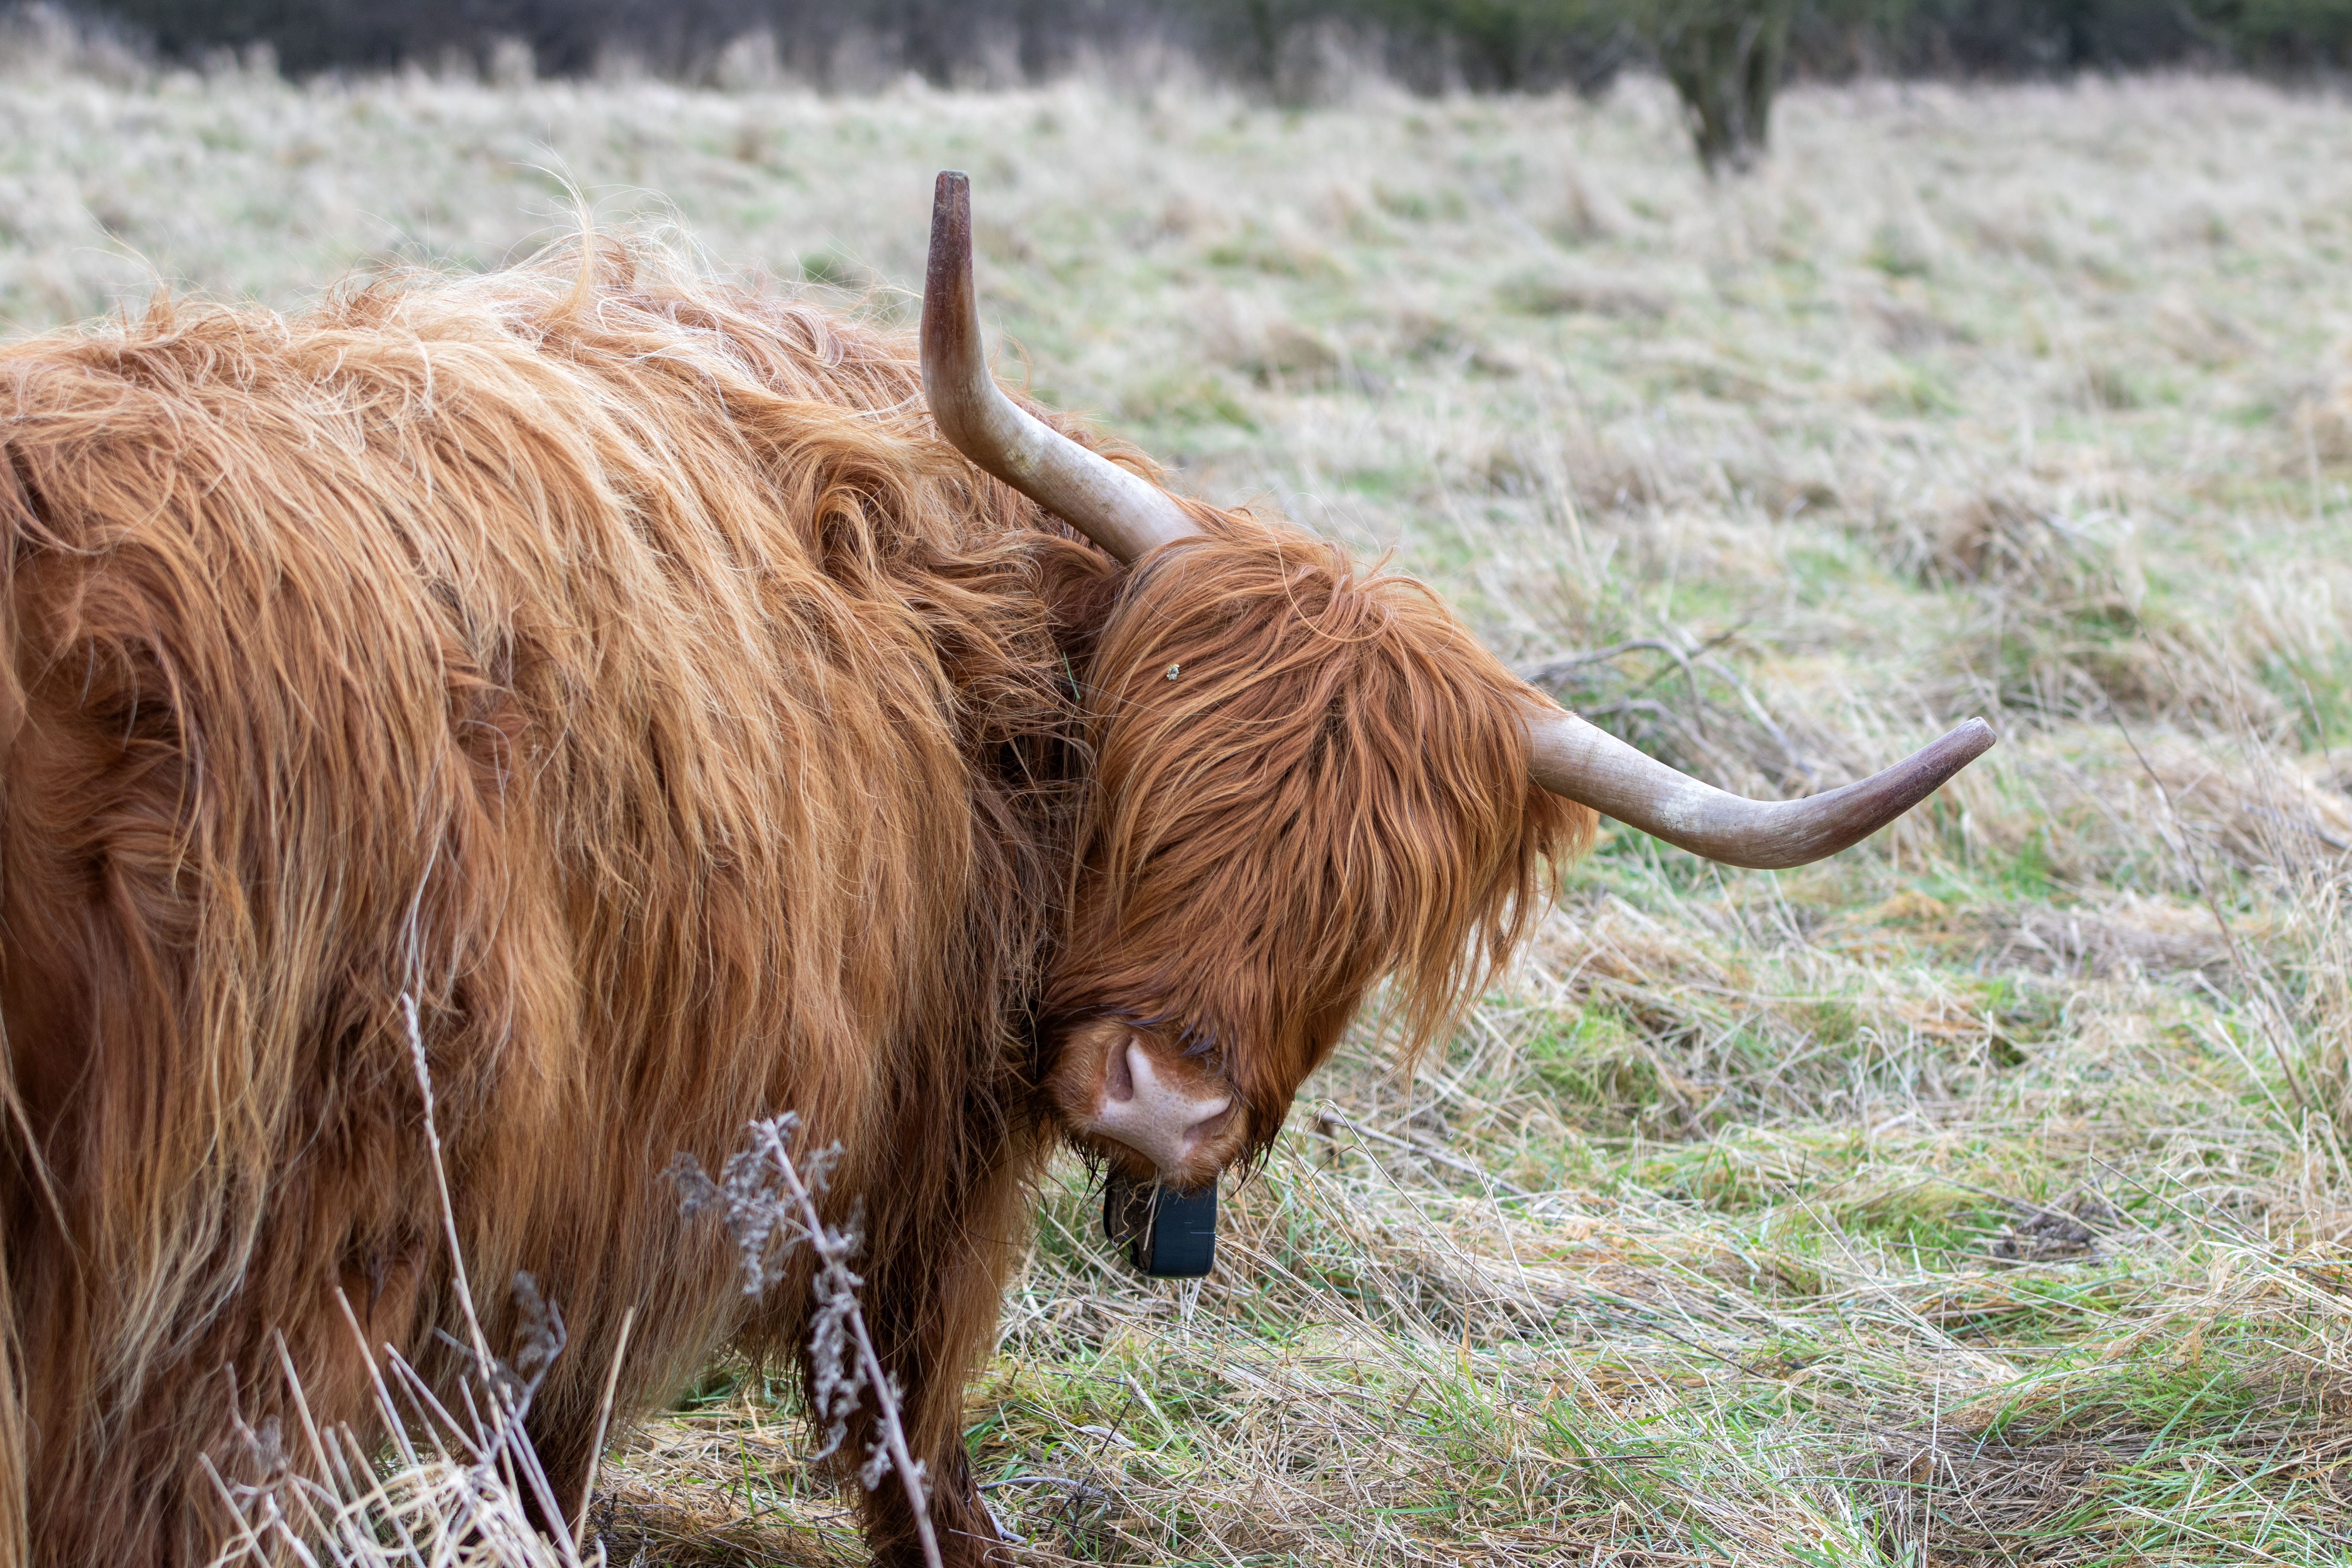 A Highland cattle looks at the camera